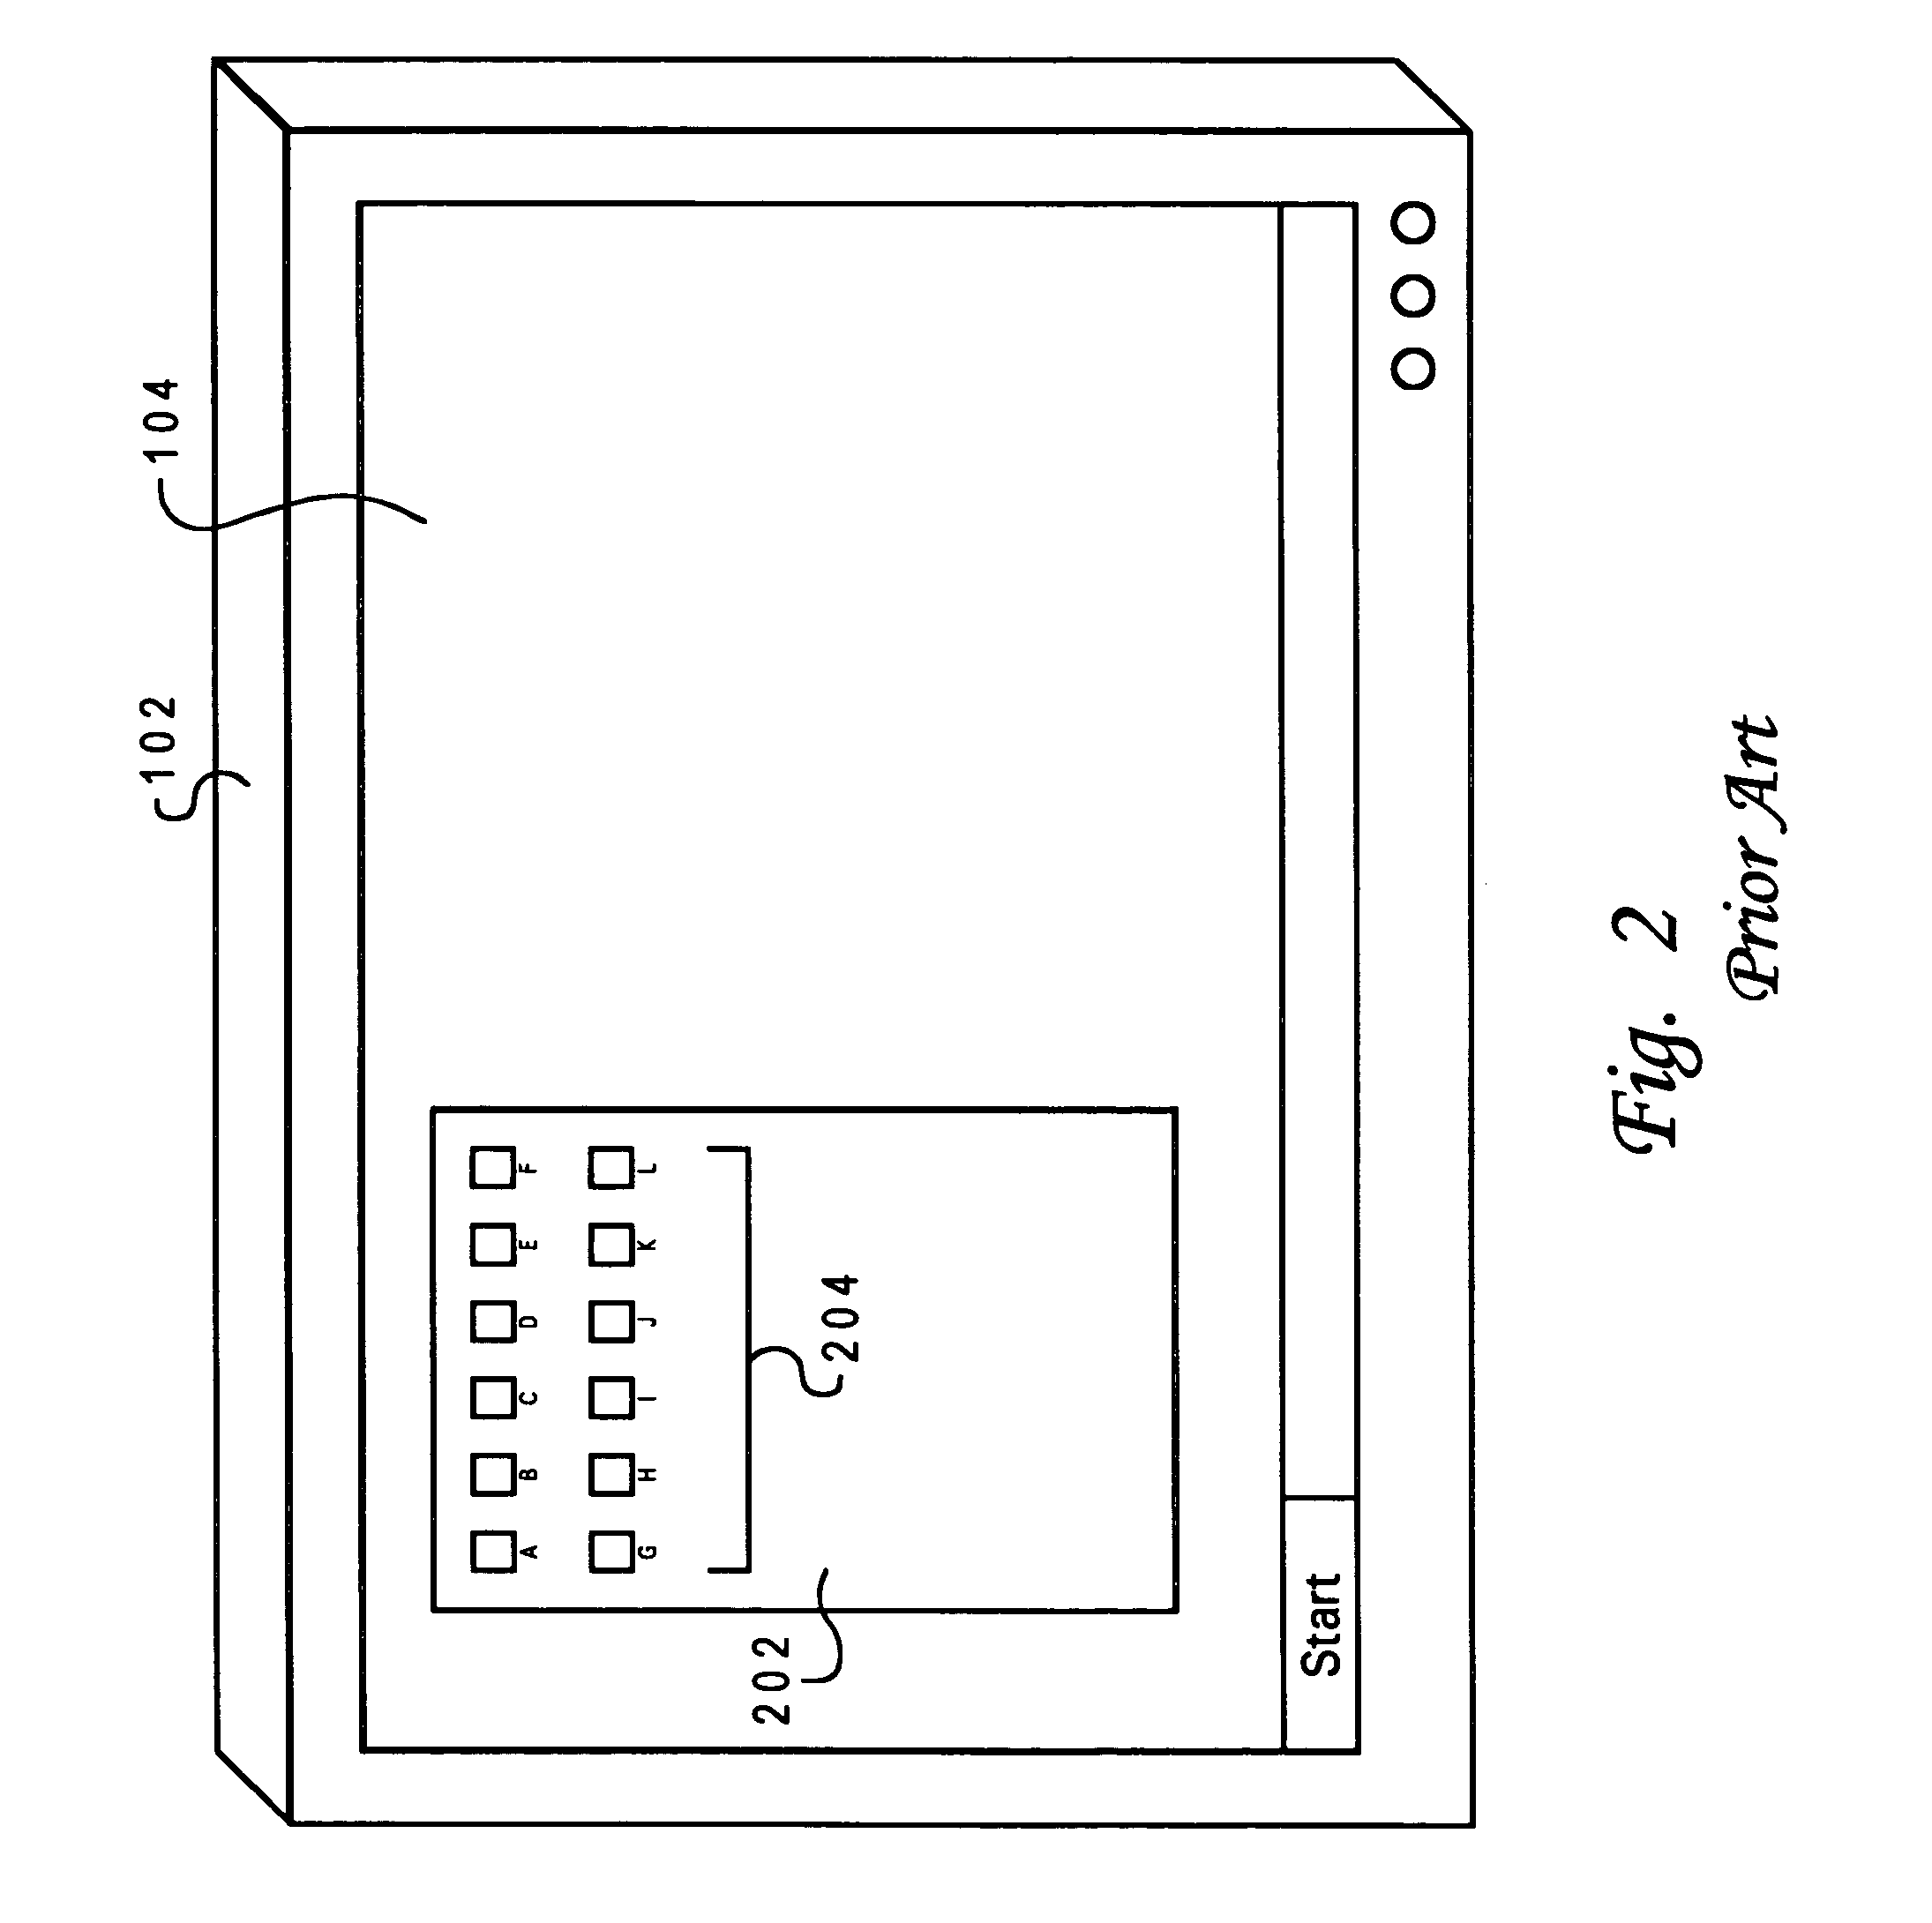 Automatically scaling icons to fit a display area within a data processing system